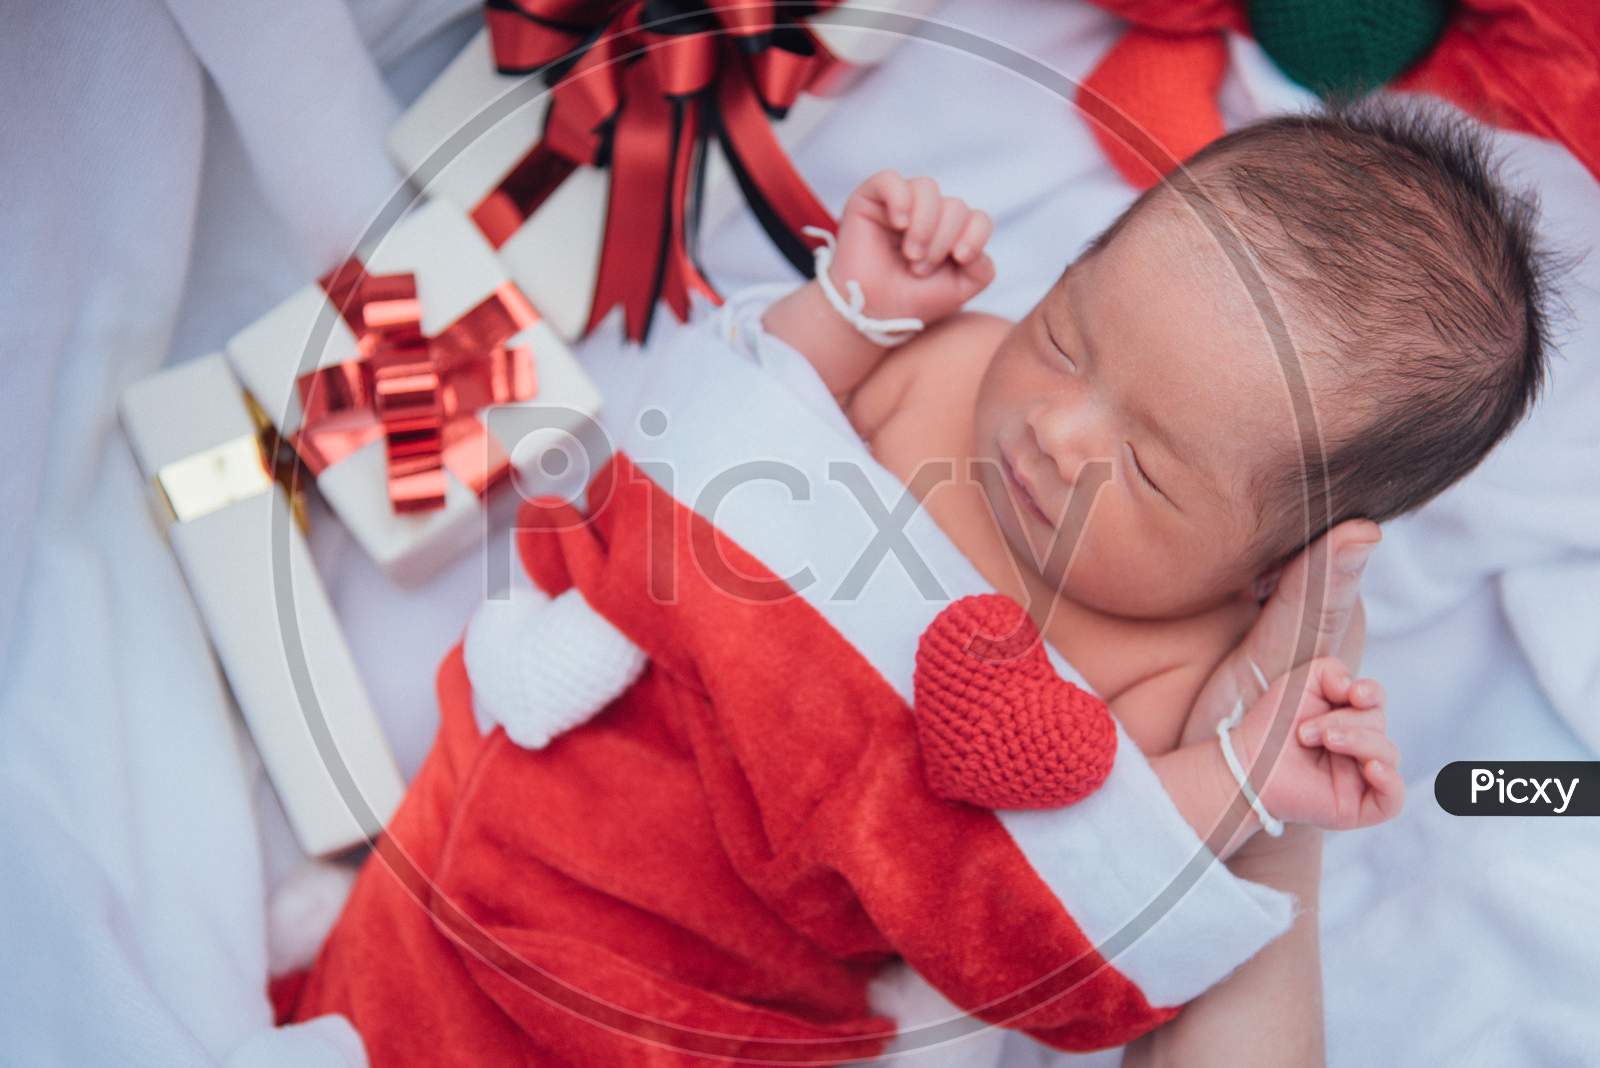 Sleeping Newborn Baby On Mother Hand In Christmas Hat With Gift Box From Santa Claus And Yarn Heart On White Soft Towel. Cute Infant Lifestyle And Innocent Lying In Cold Snow Season. New Year Winter